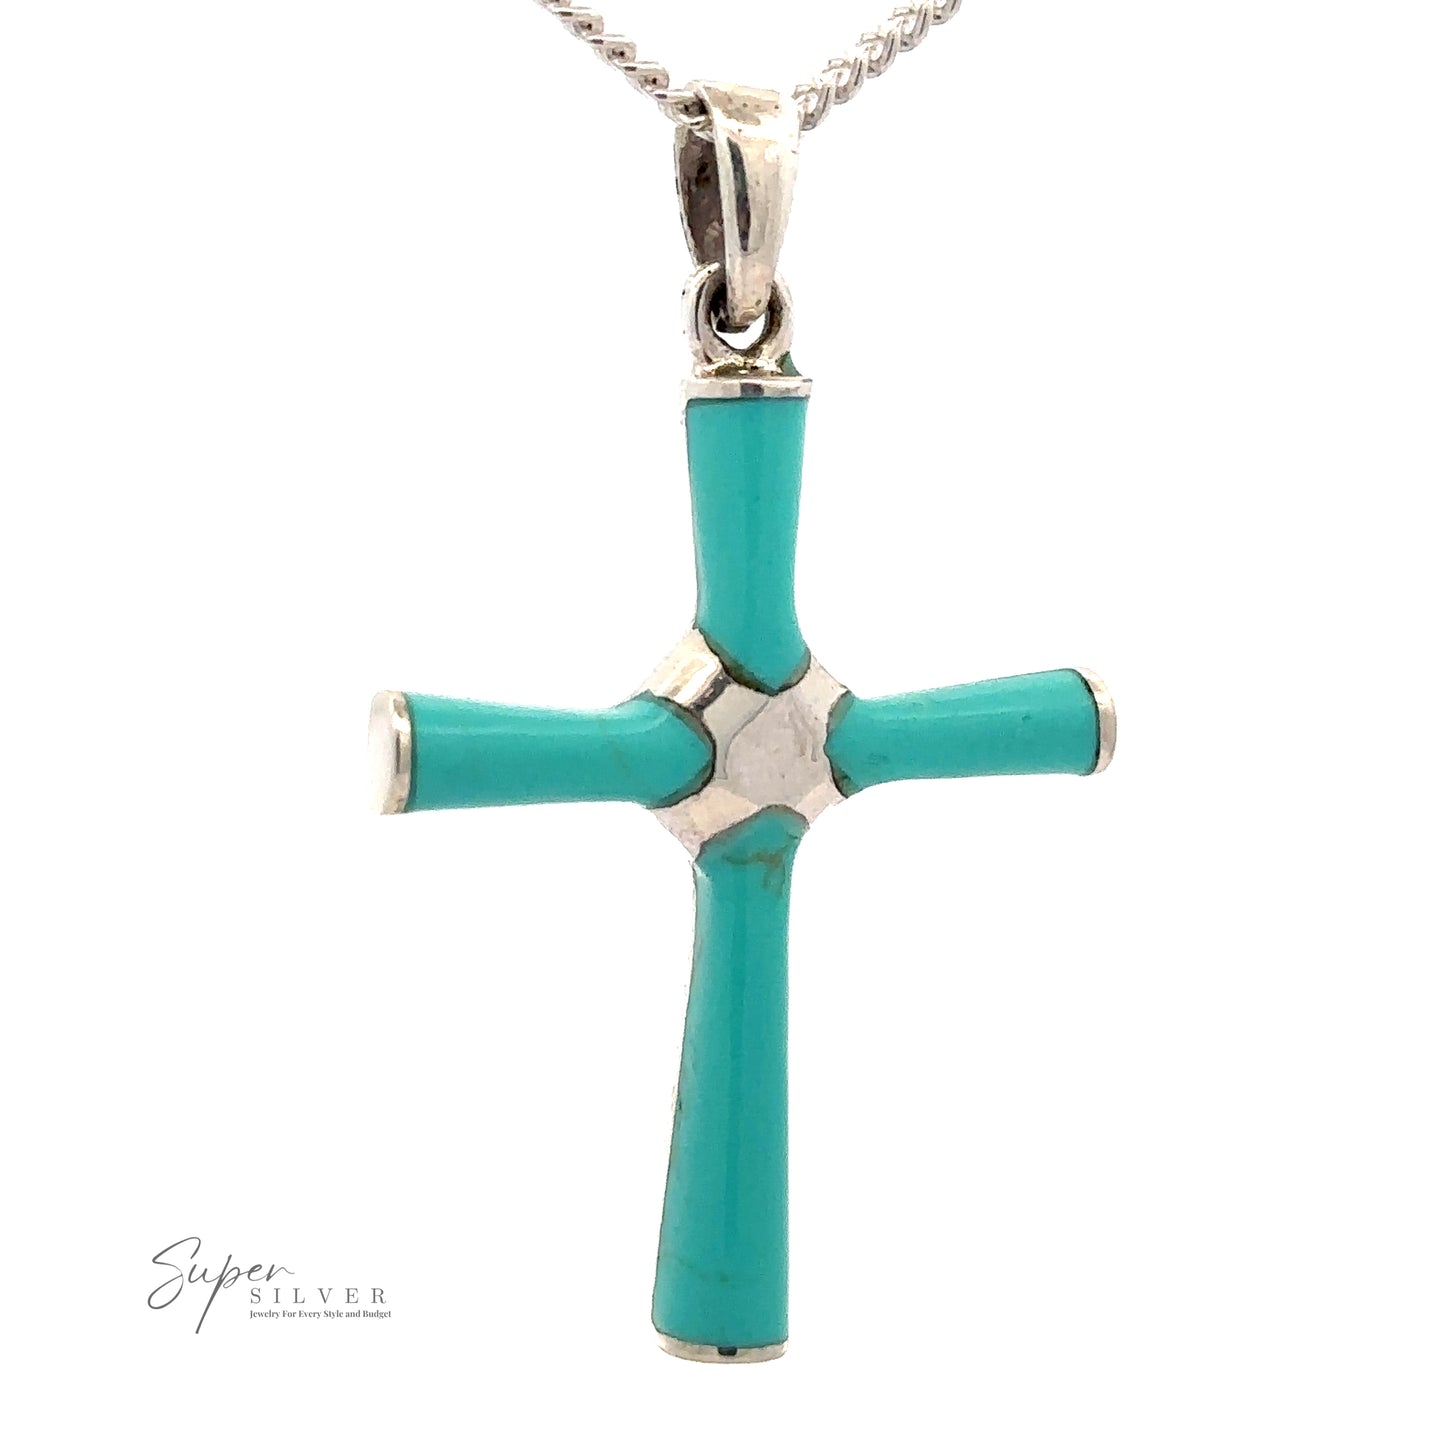 
                  
                    Close-up of a Turquoise Cross Pendant with silver accents, hanging from a .925 Sterling Silver chain. The logo "Super Silver" is visible in the bottom left corner.
                  
                